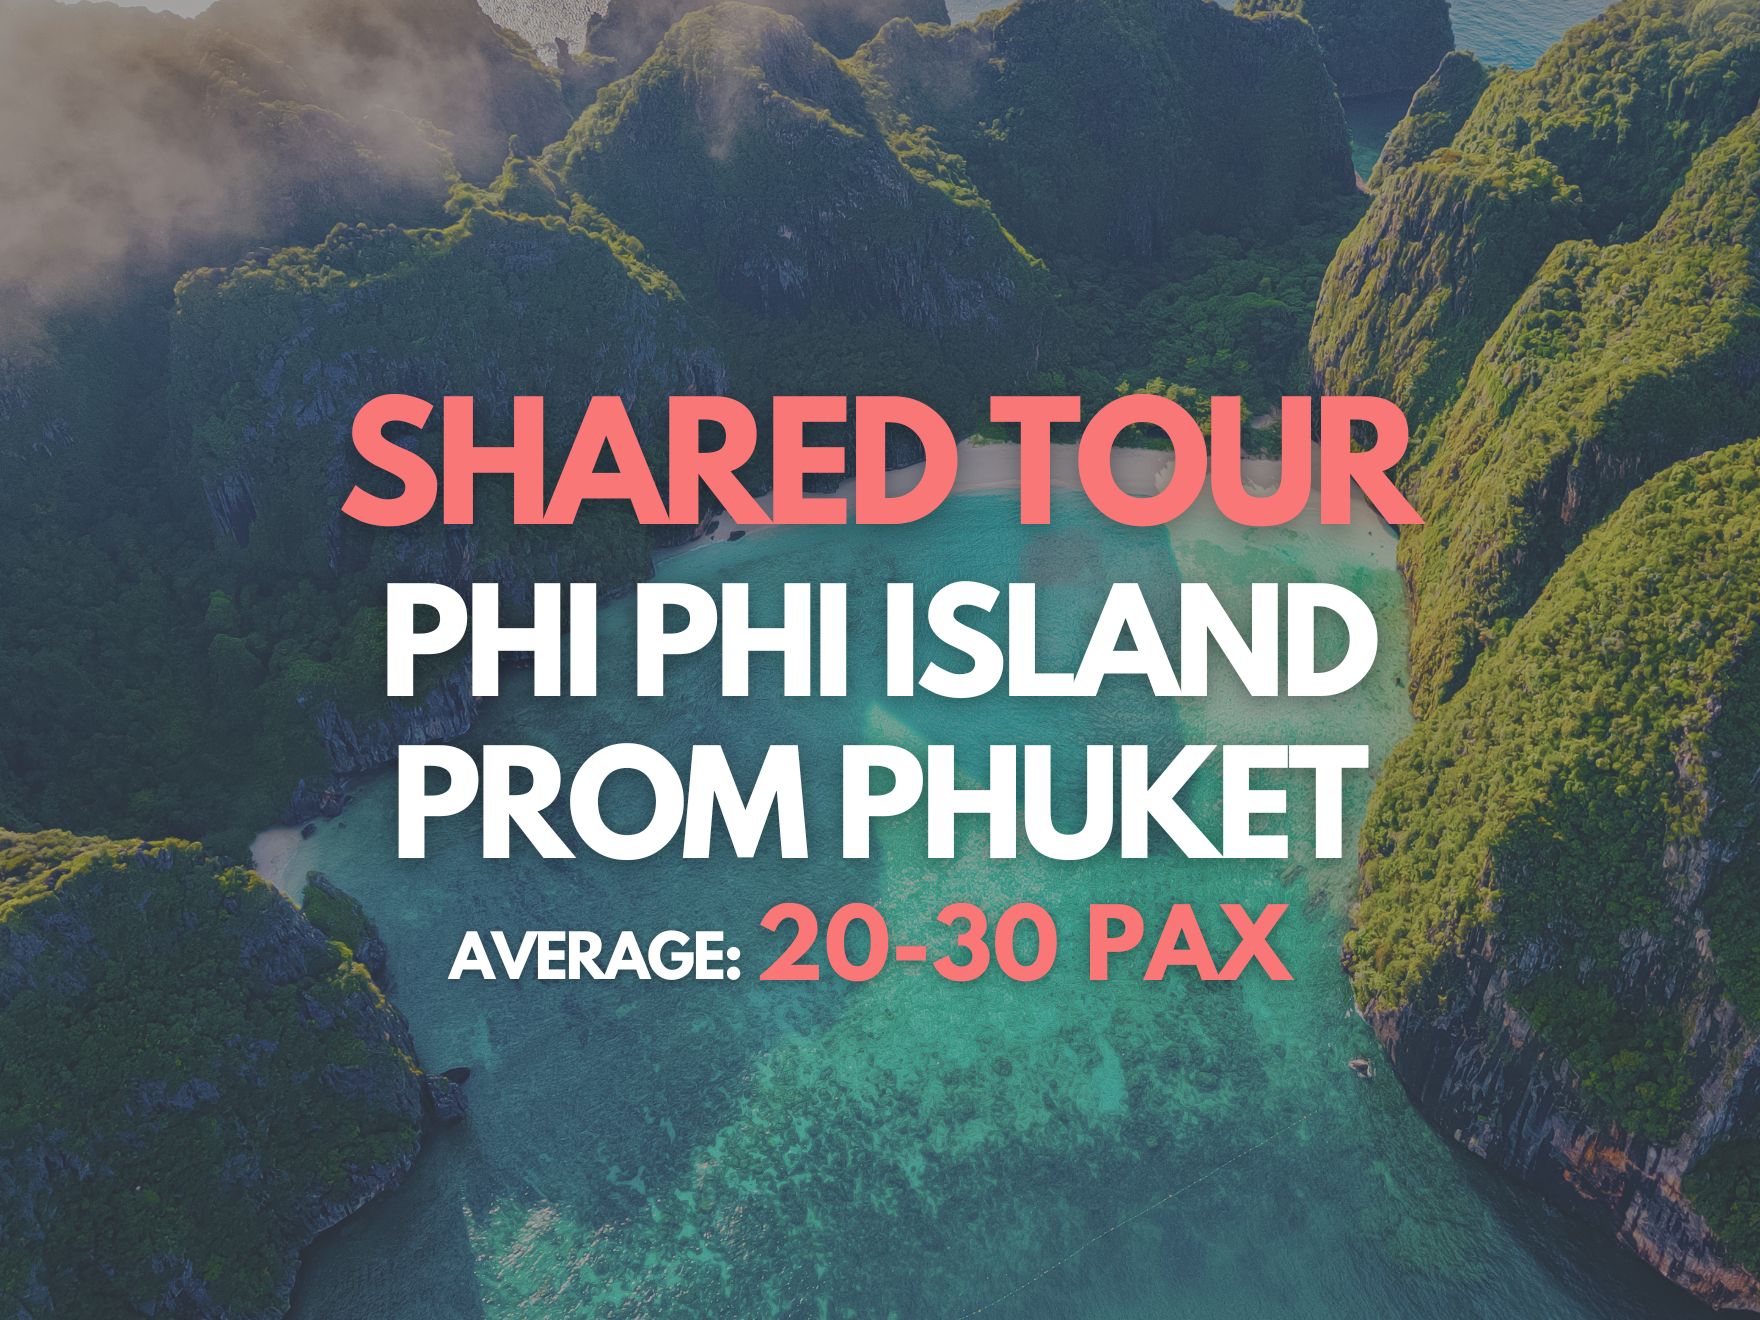 Budget Cheap Phi Phi Island Backpackers Tour Shared Boats Lower Price Phi Phi Island Tour Cheap Budget Public Open Shared Joined Joint Group Tour